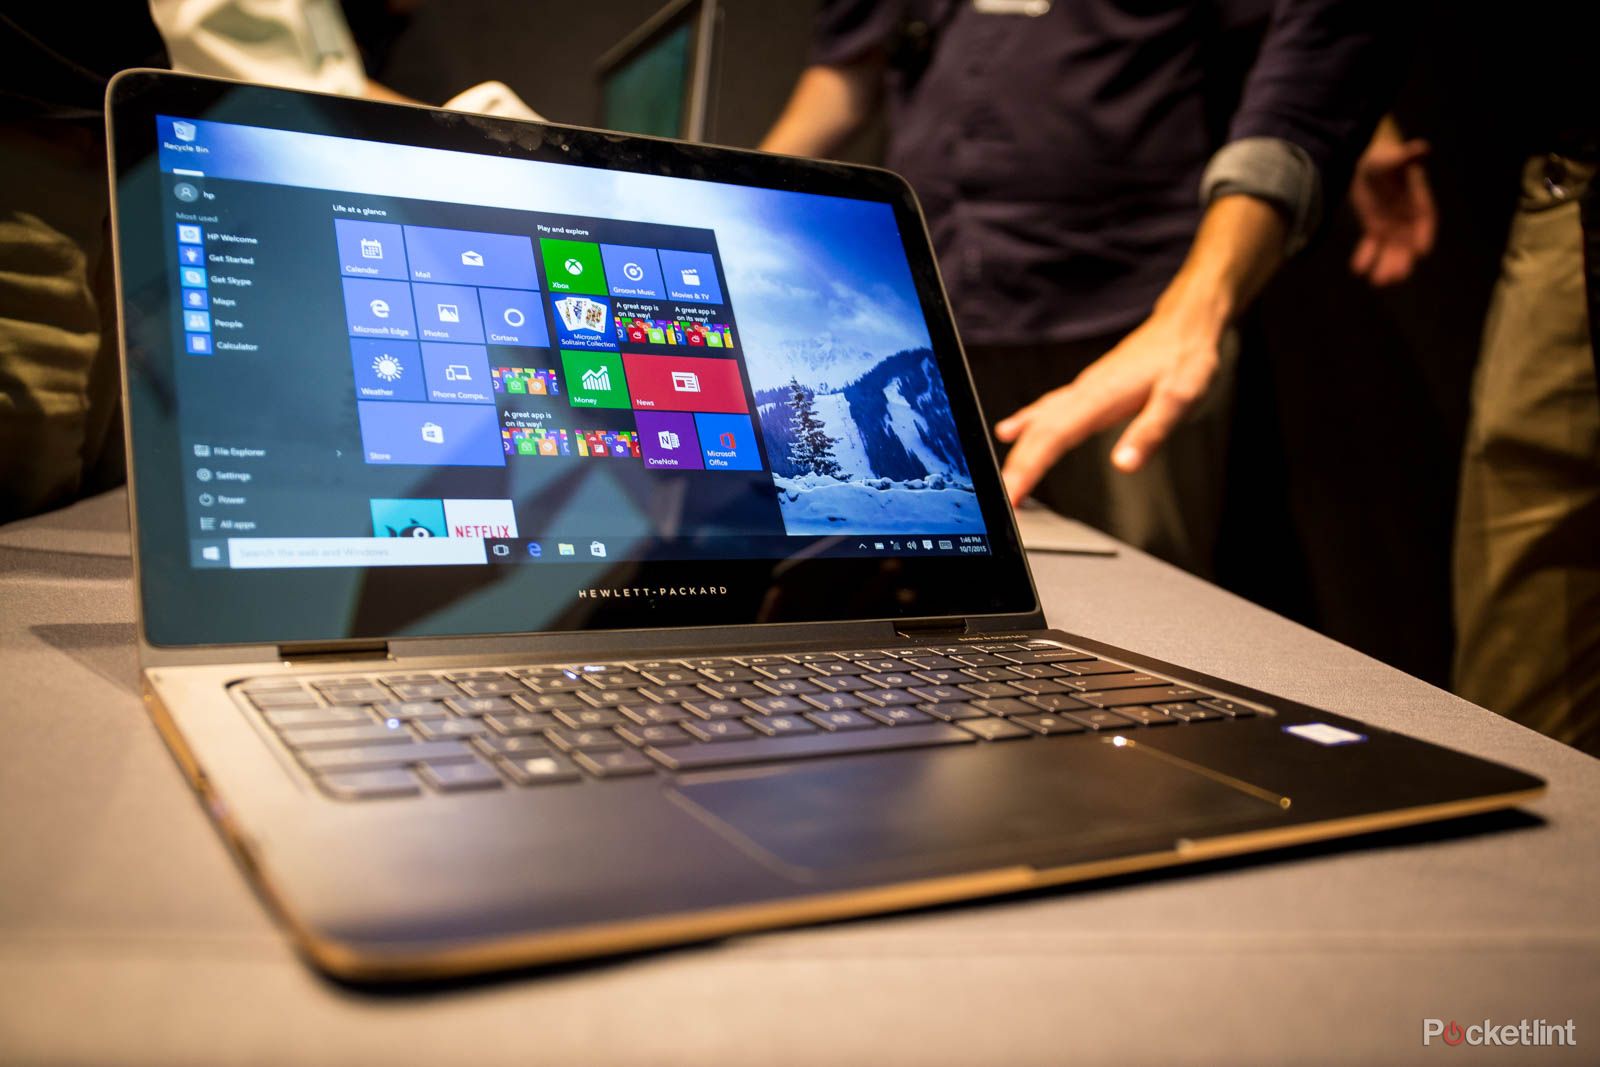 hp spectre x360 bang olufsen limited edition hands on image 1